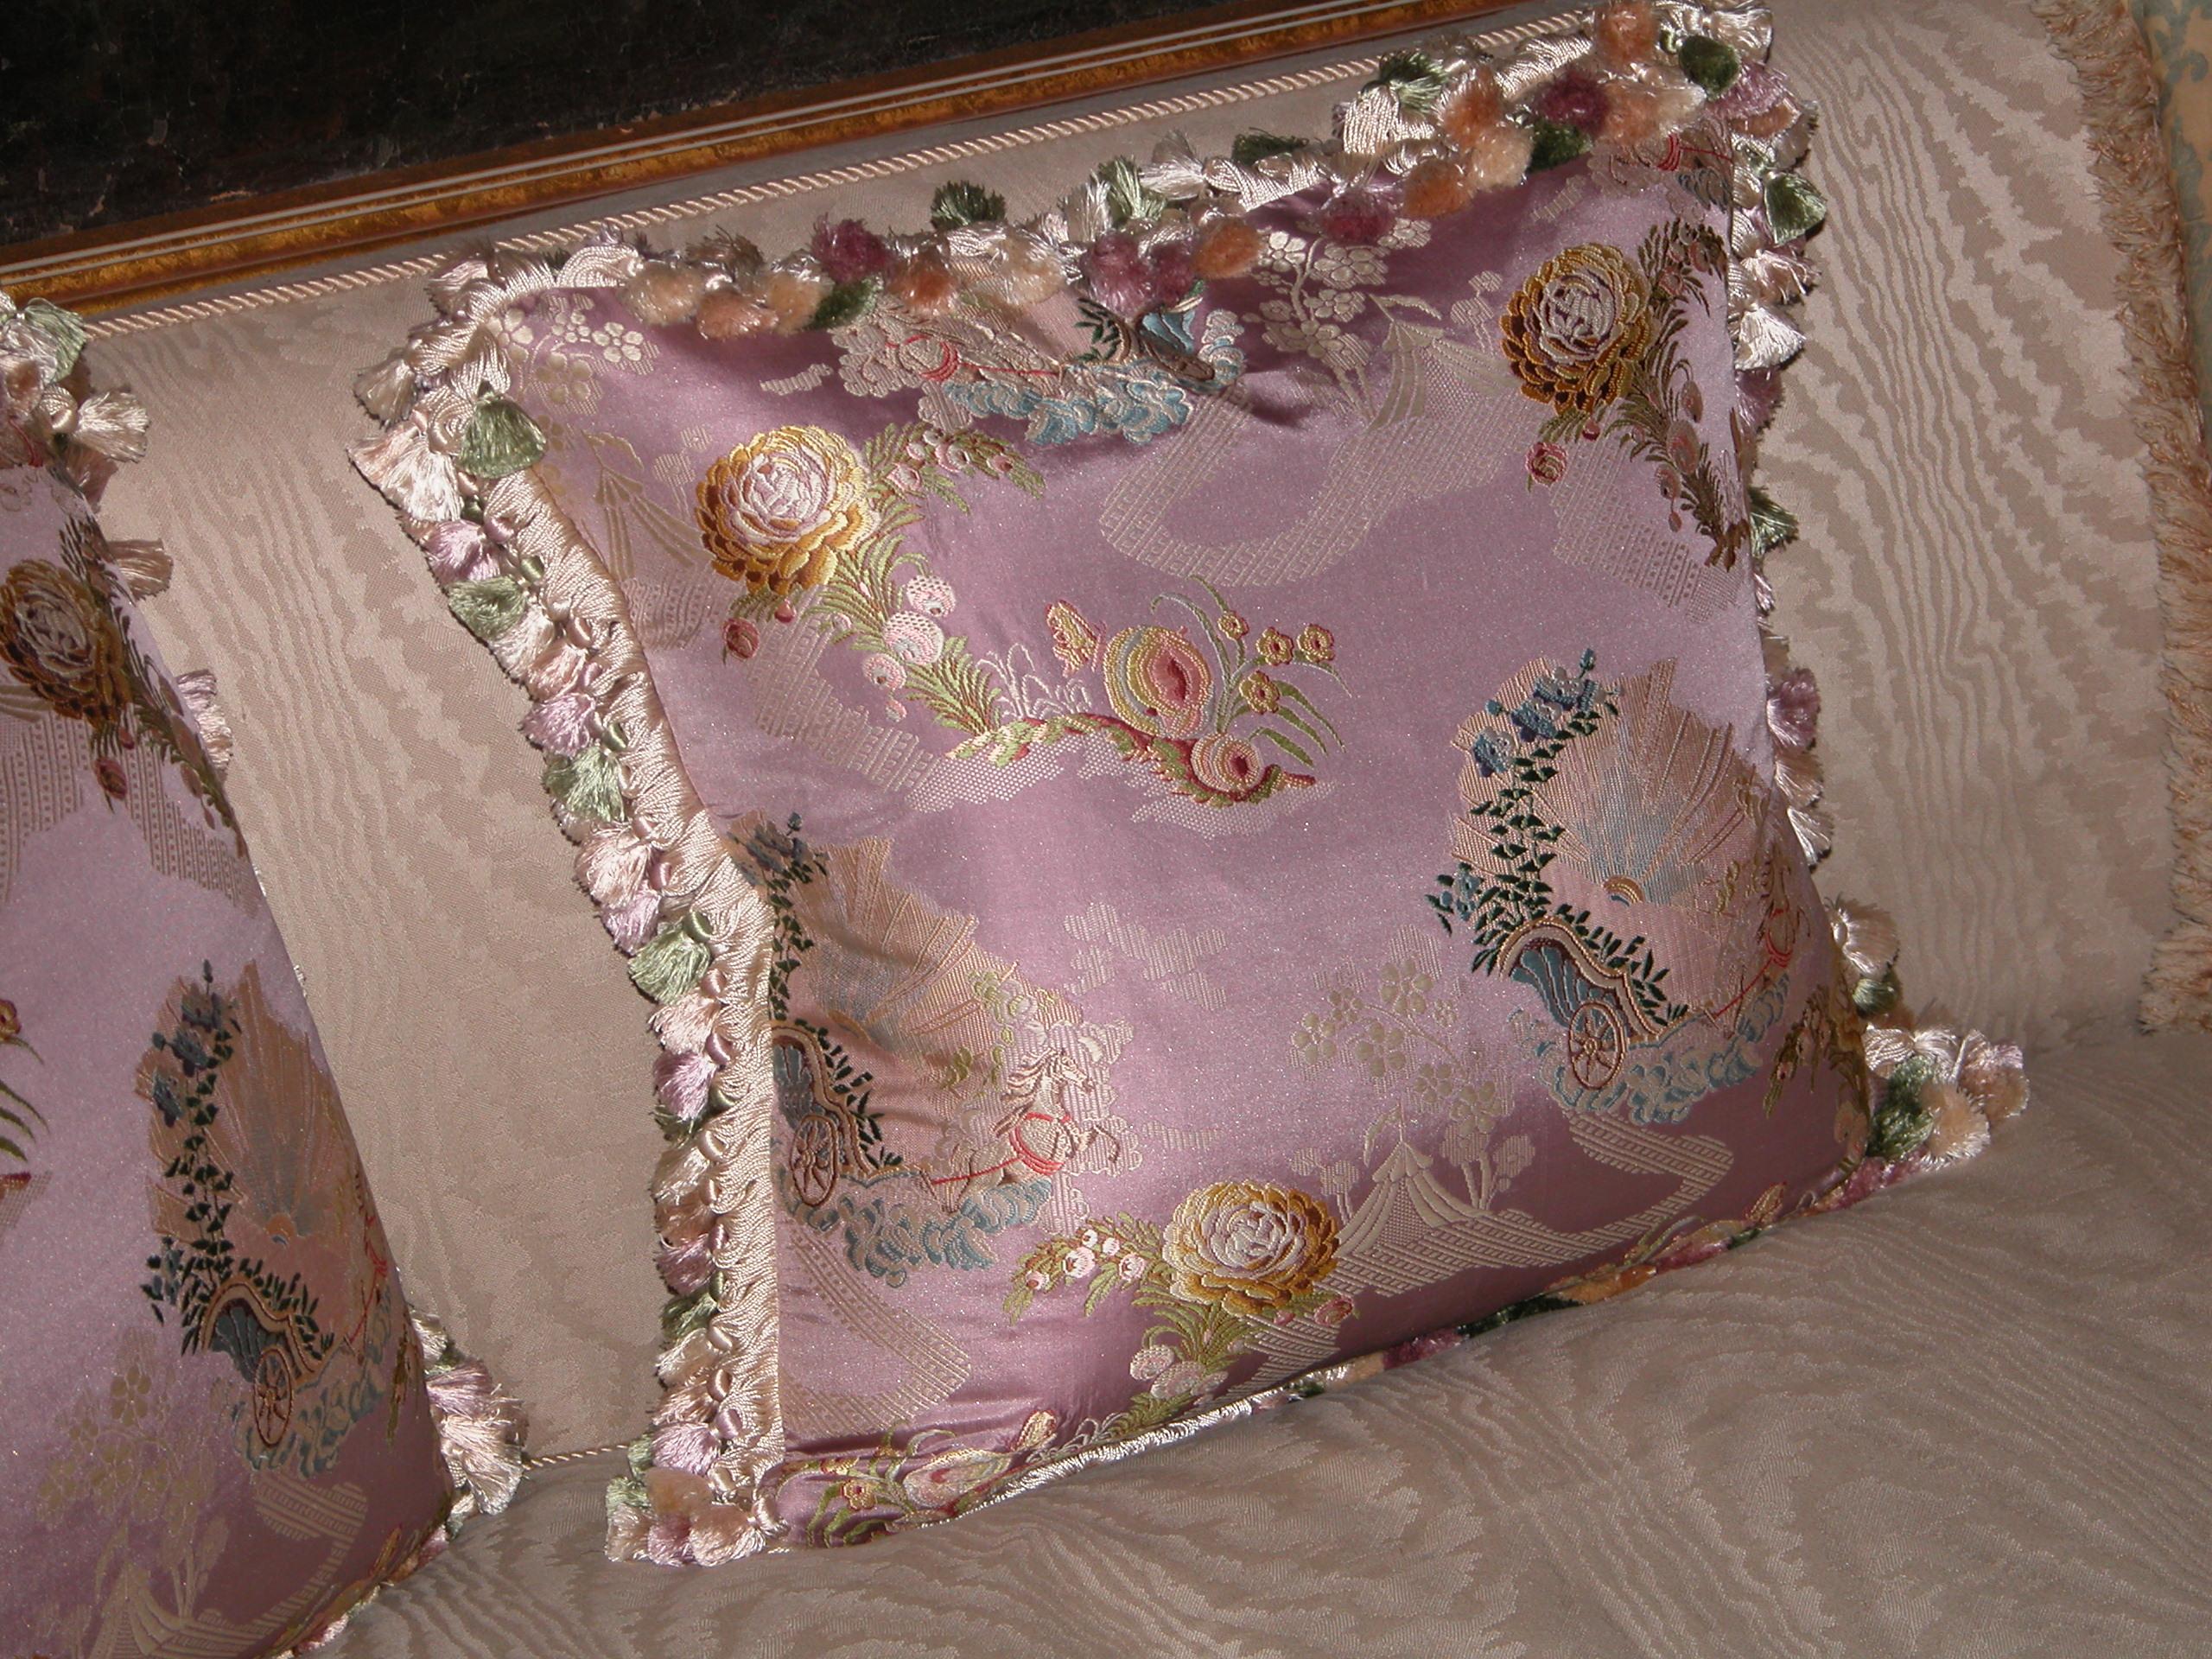 Contemporary Pair Pillows Made of French Silk Brocade with Scalamandre Silk Tassel Trimming